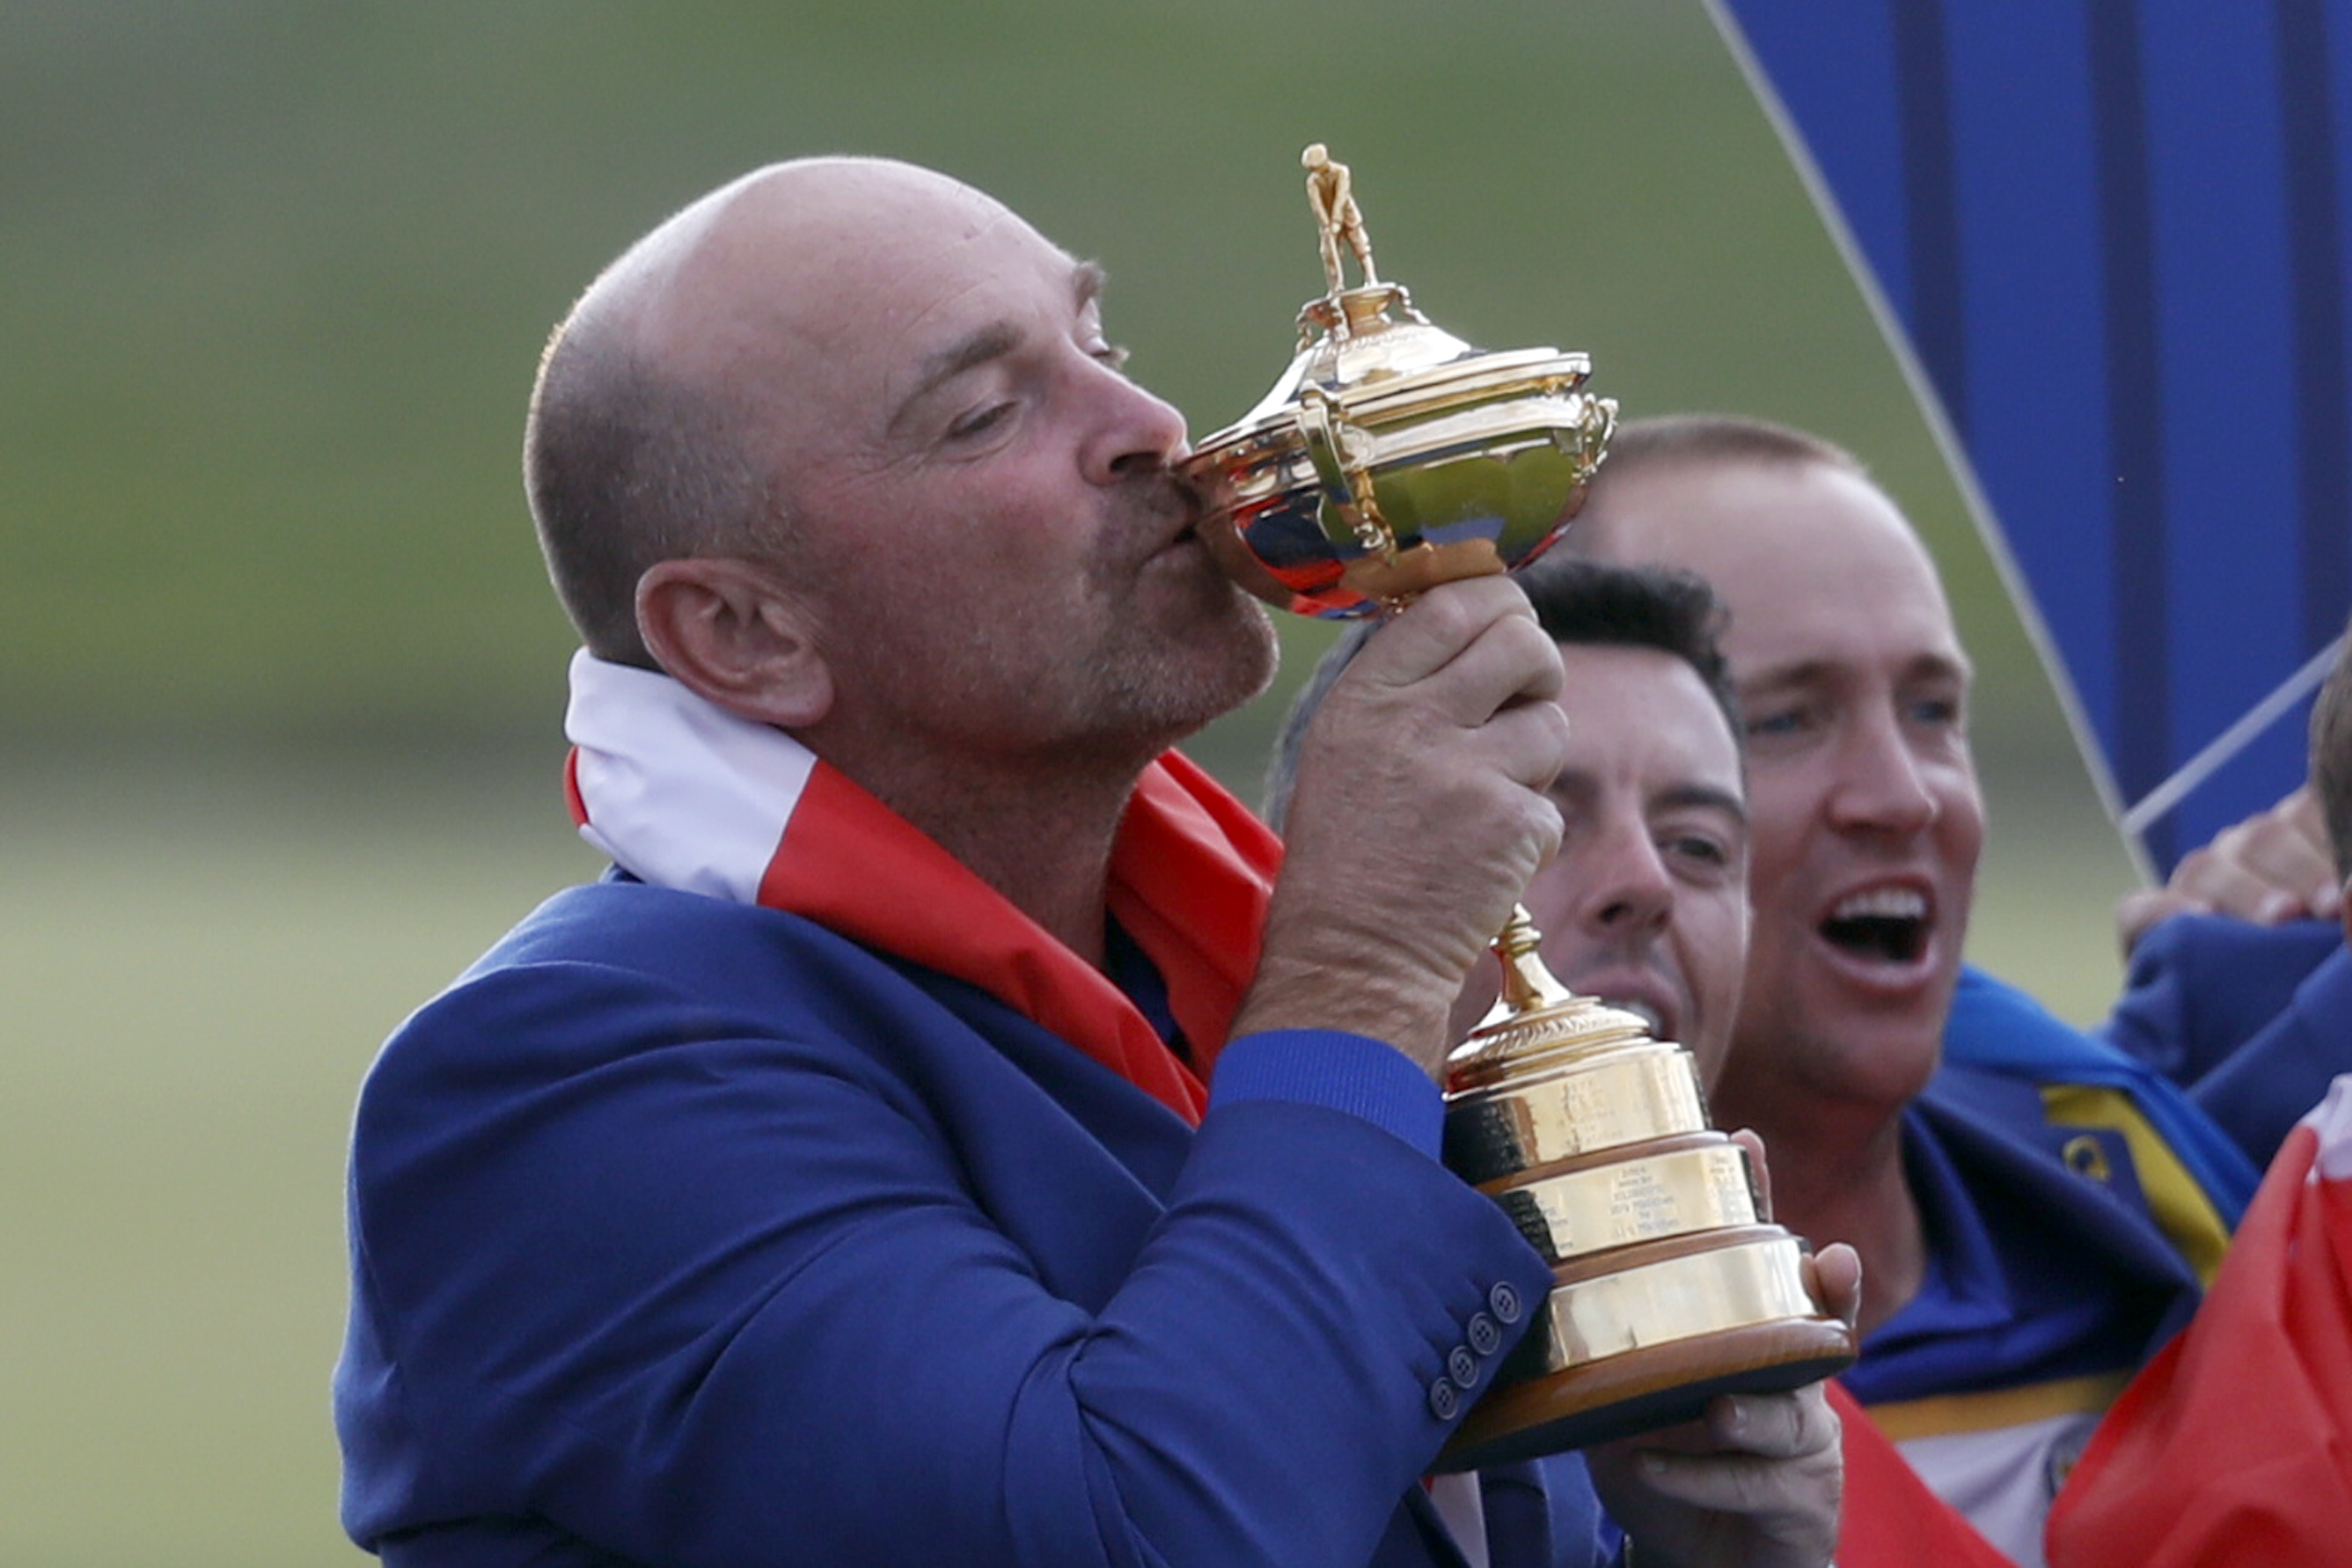 Dominant Europe Wins Back Ryder Cup The Daily Courier Prescott Az 